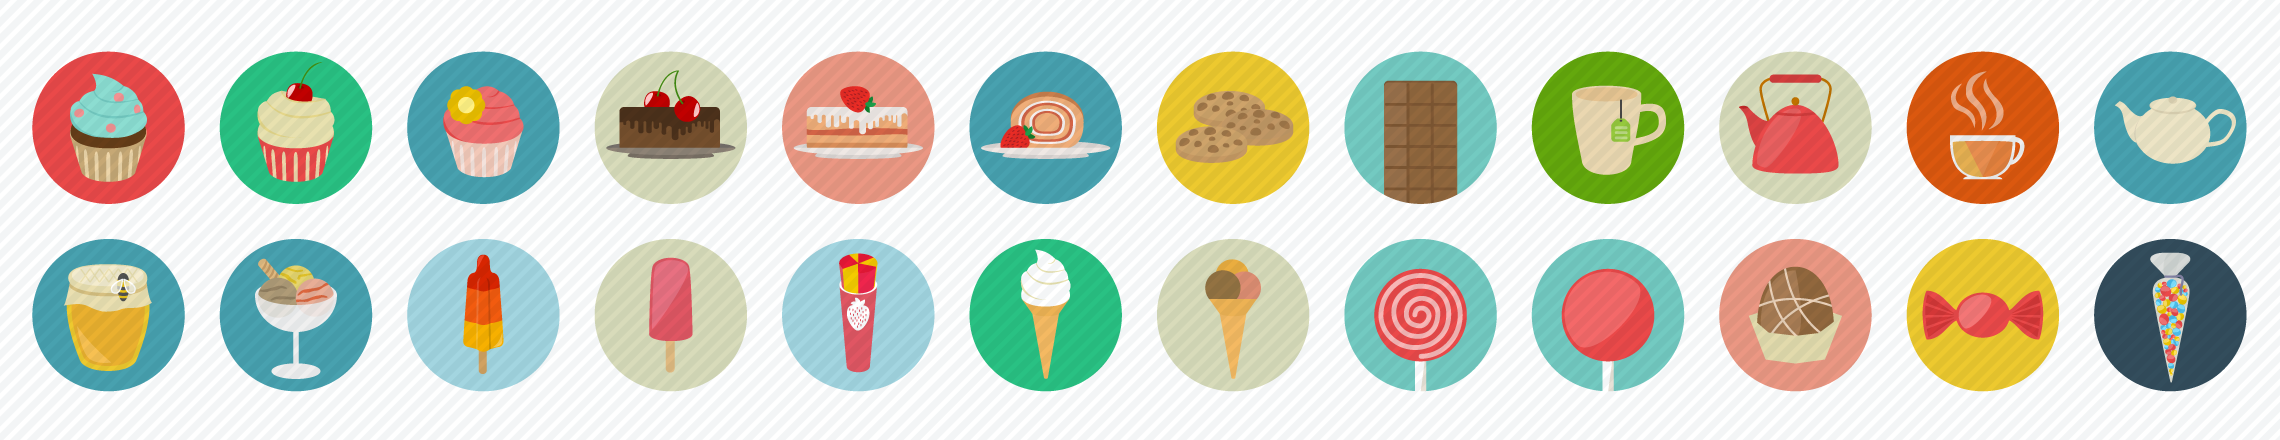 Sweets_Drinks_Flat_Icons